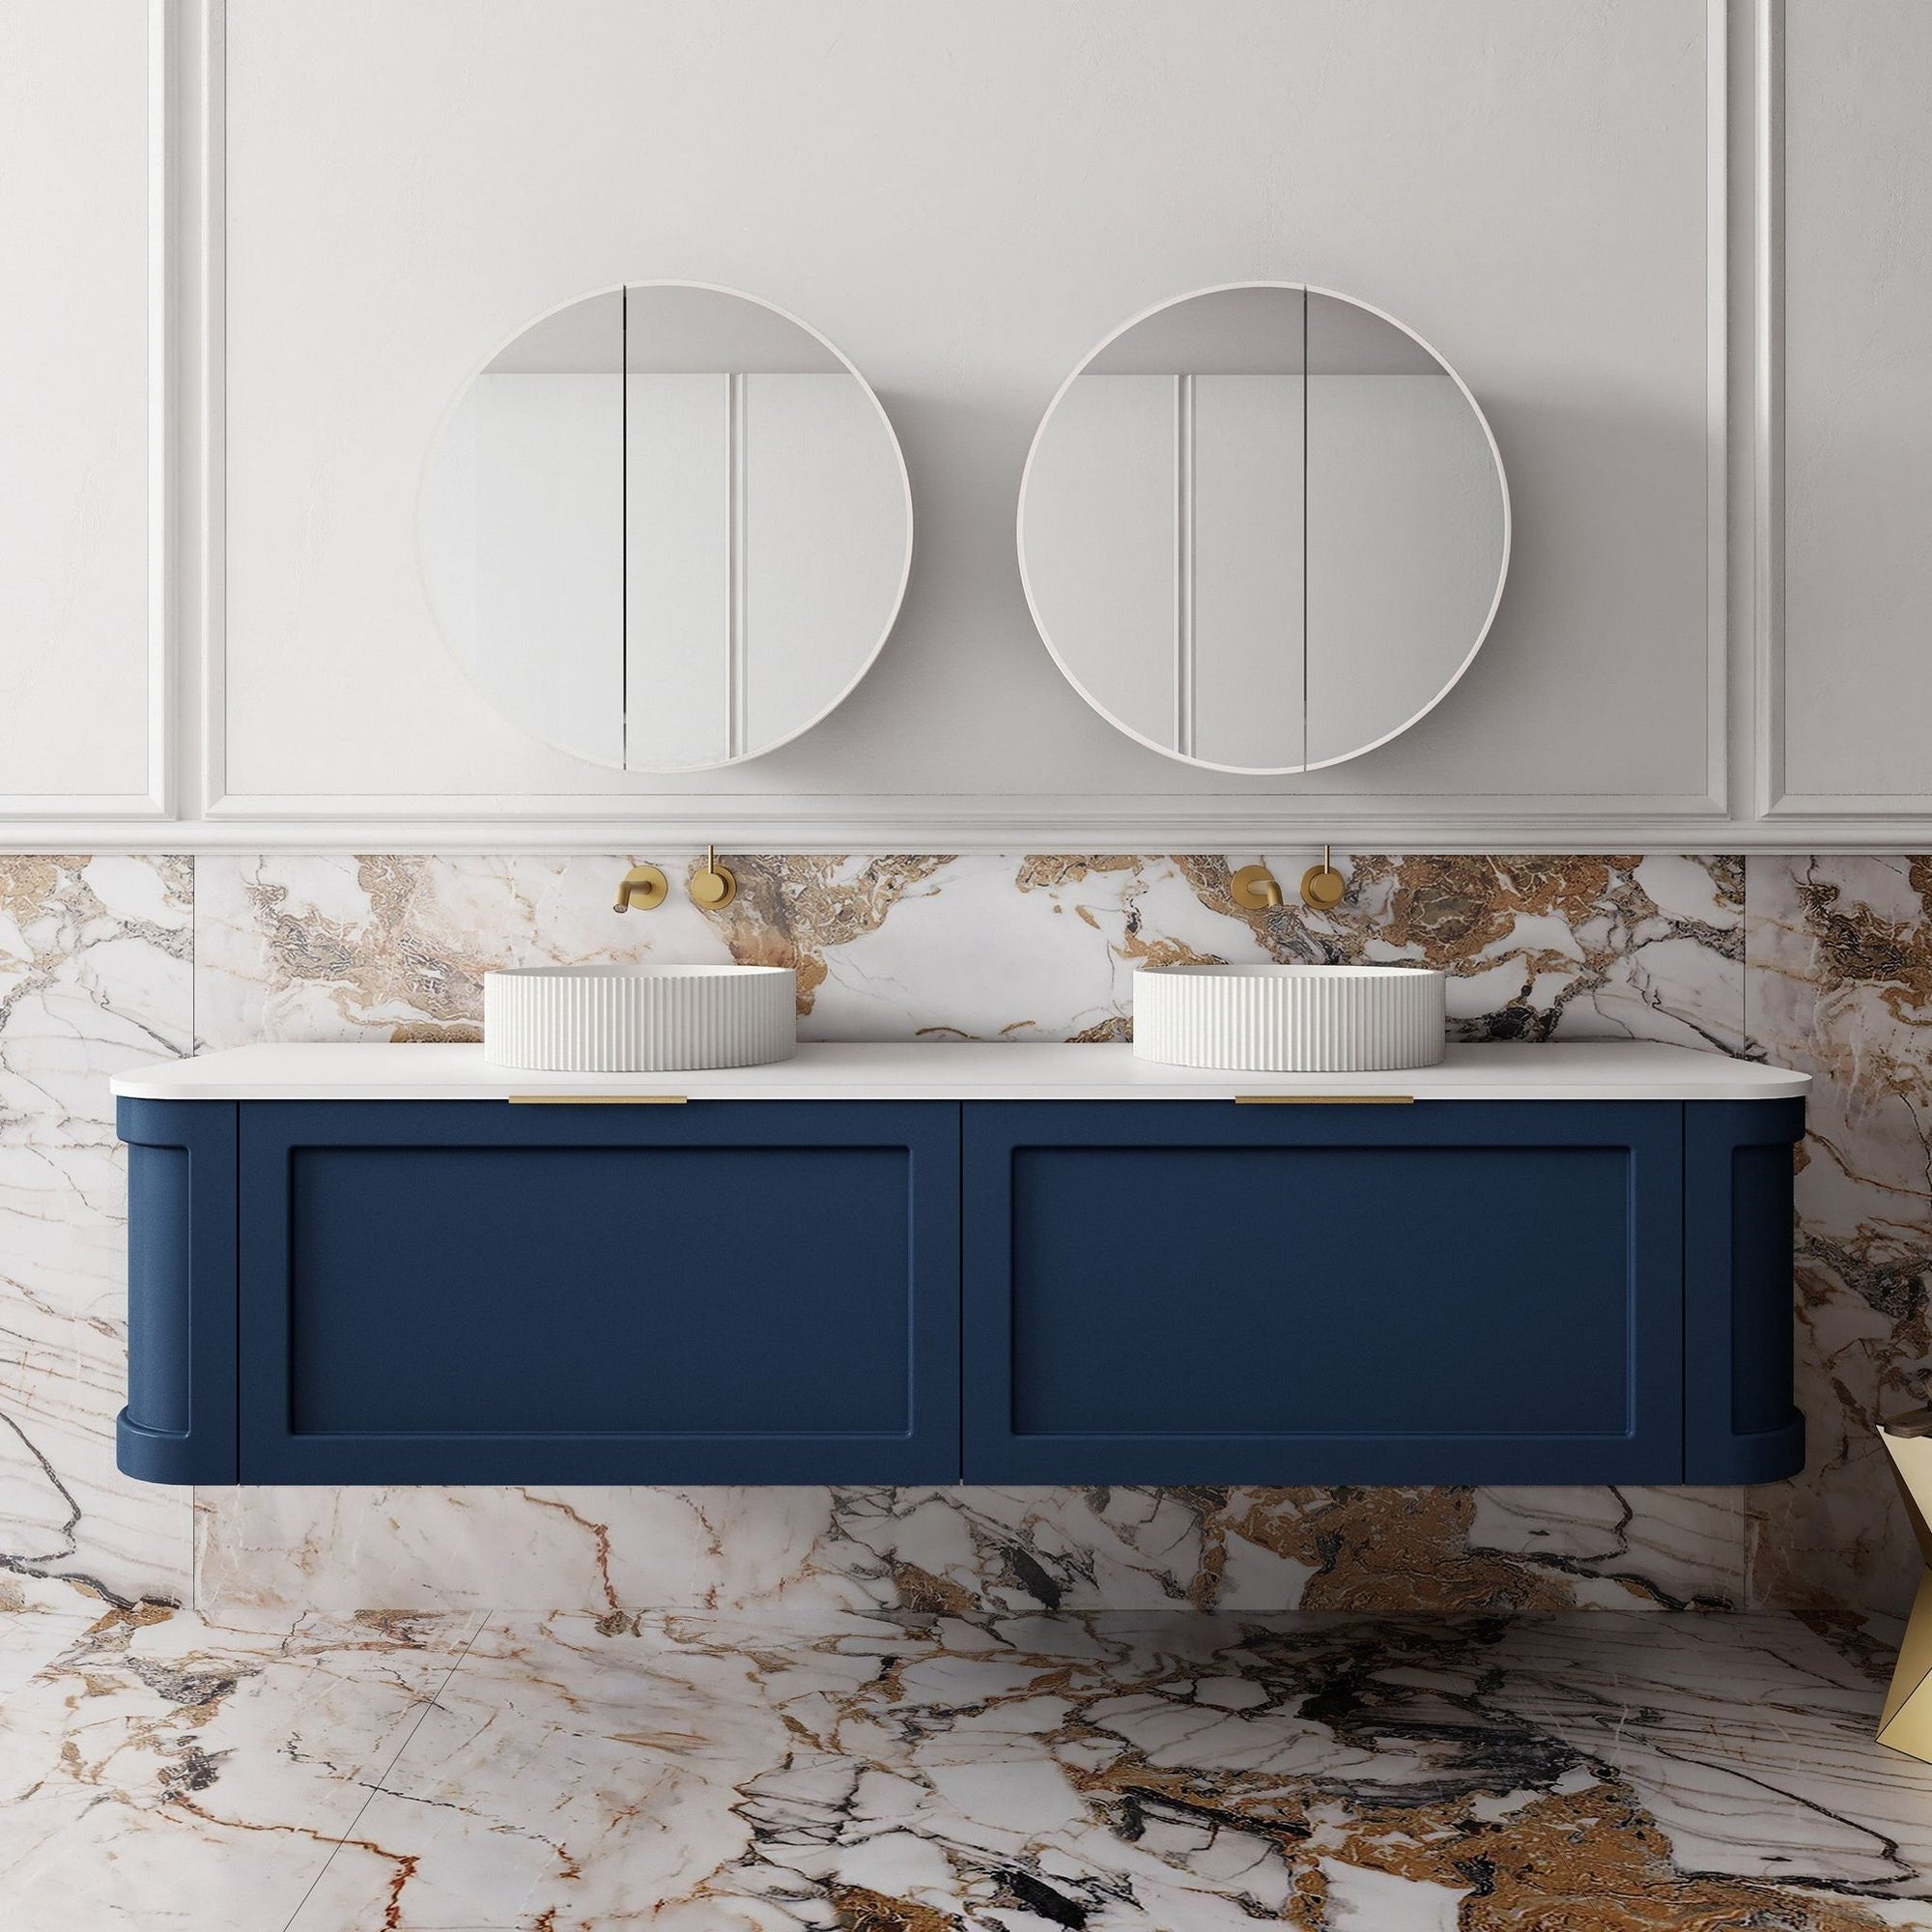 Cassa Design Westminister curved wall hung vanity